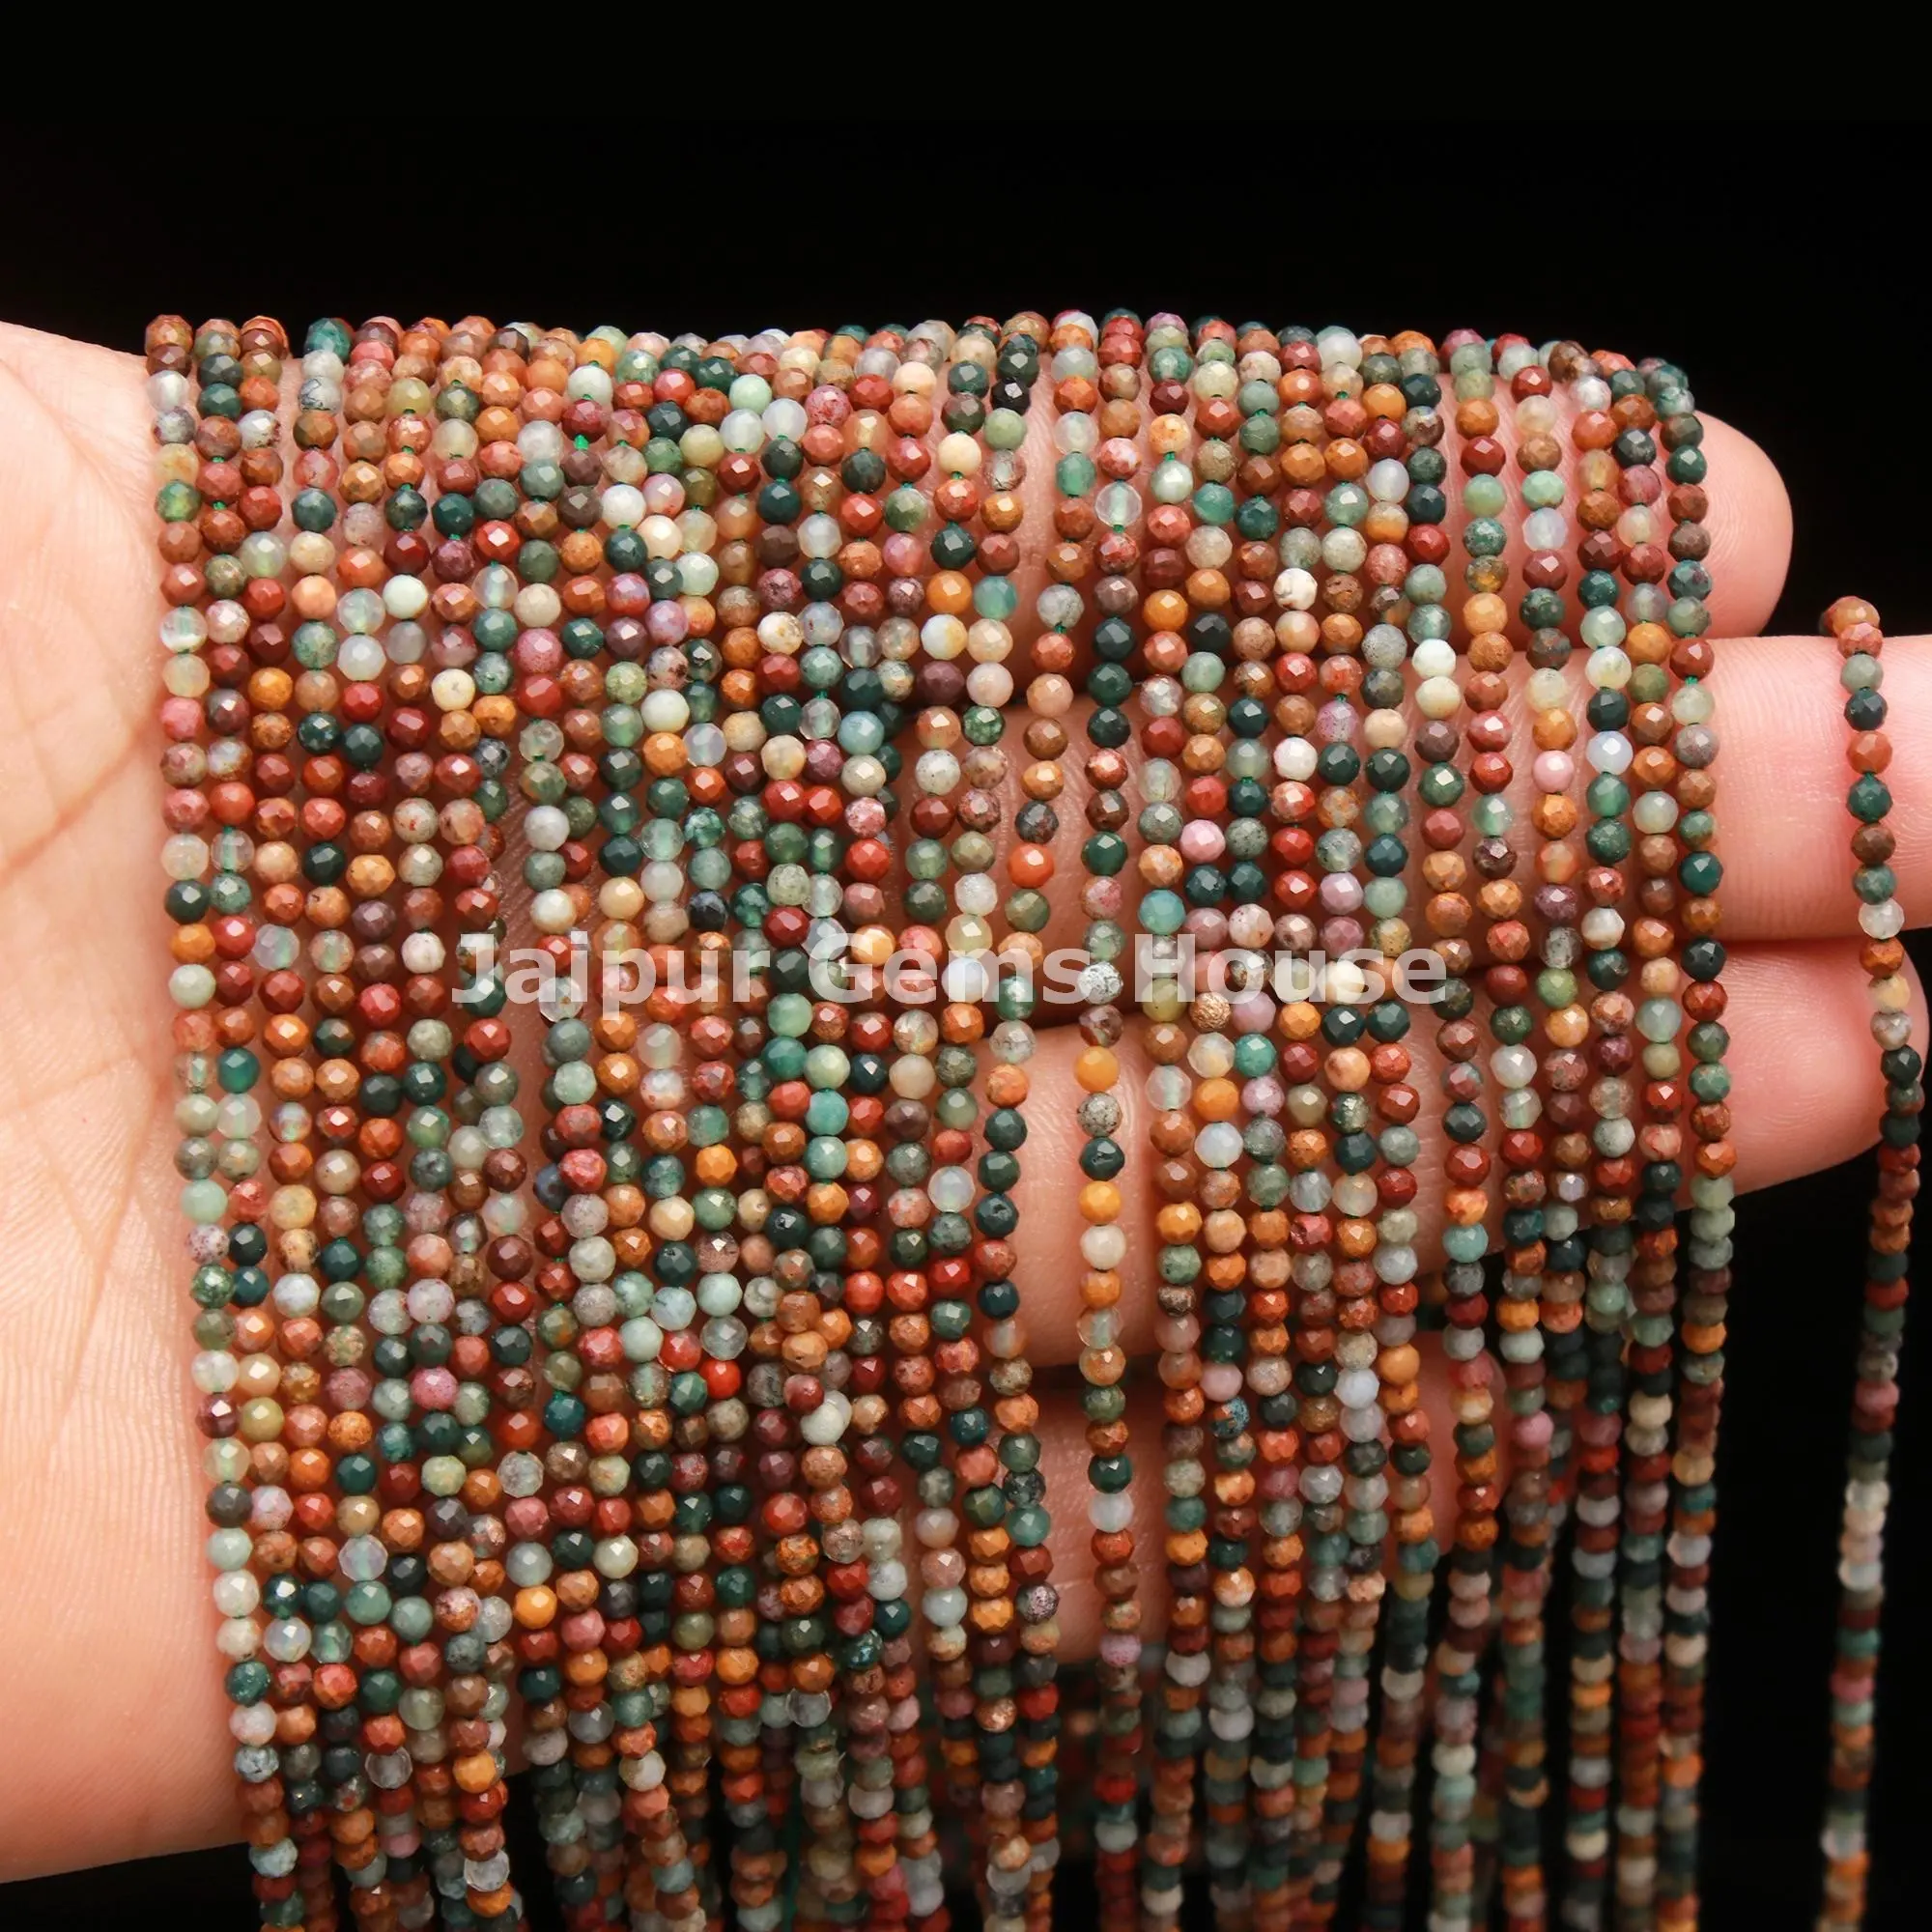 Natural Indian Agate Micro Faceted Round Beads, 2mm Mix Indian Agate Gemstone Beads, AAA Quality Agate Beads Strand for Jewelry